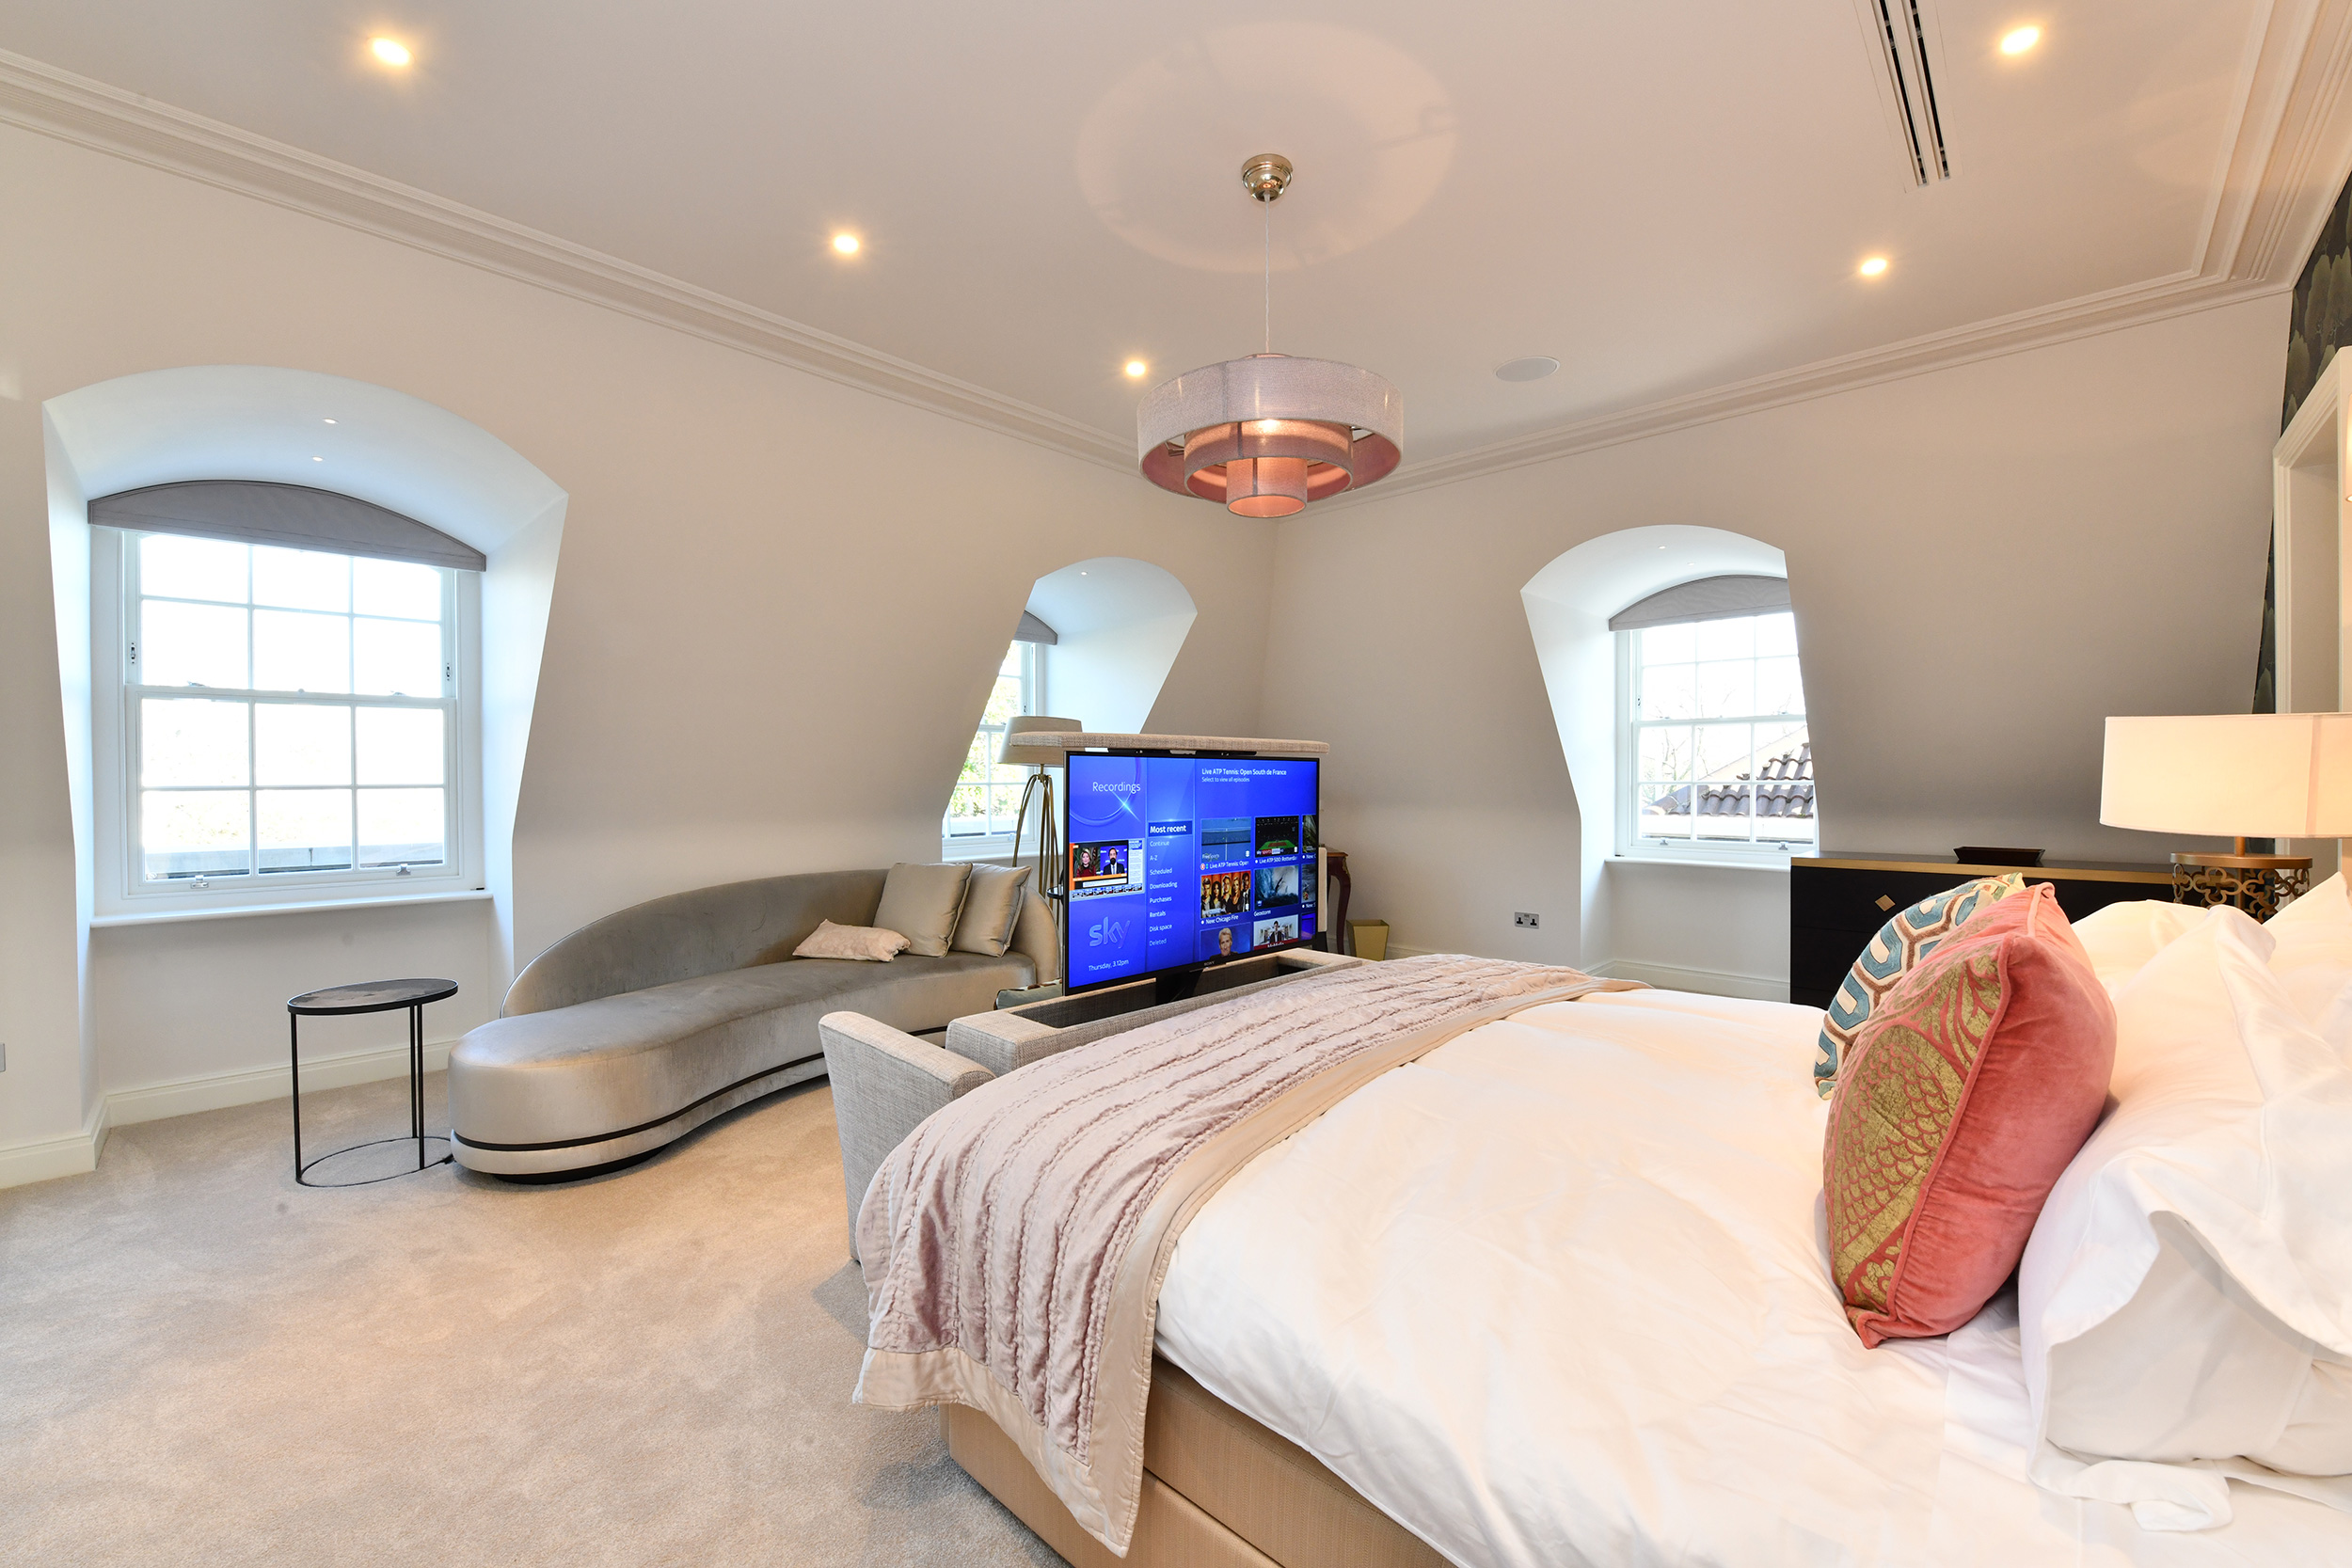 Bedroom TVs are on motorised lifts inside bespoke seating units; they can rotate to face bed or seats